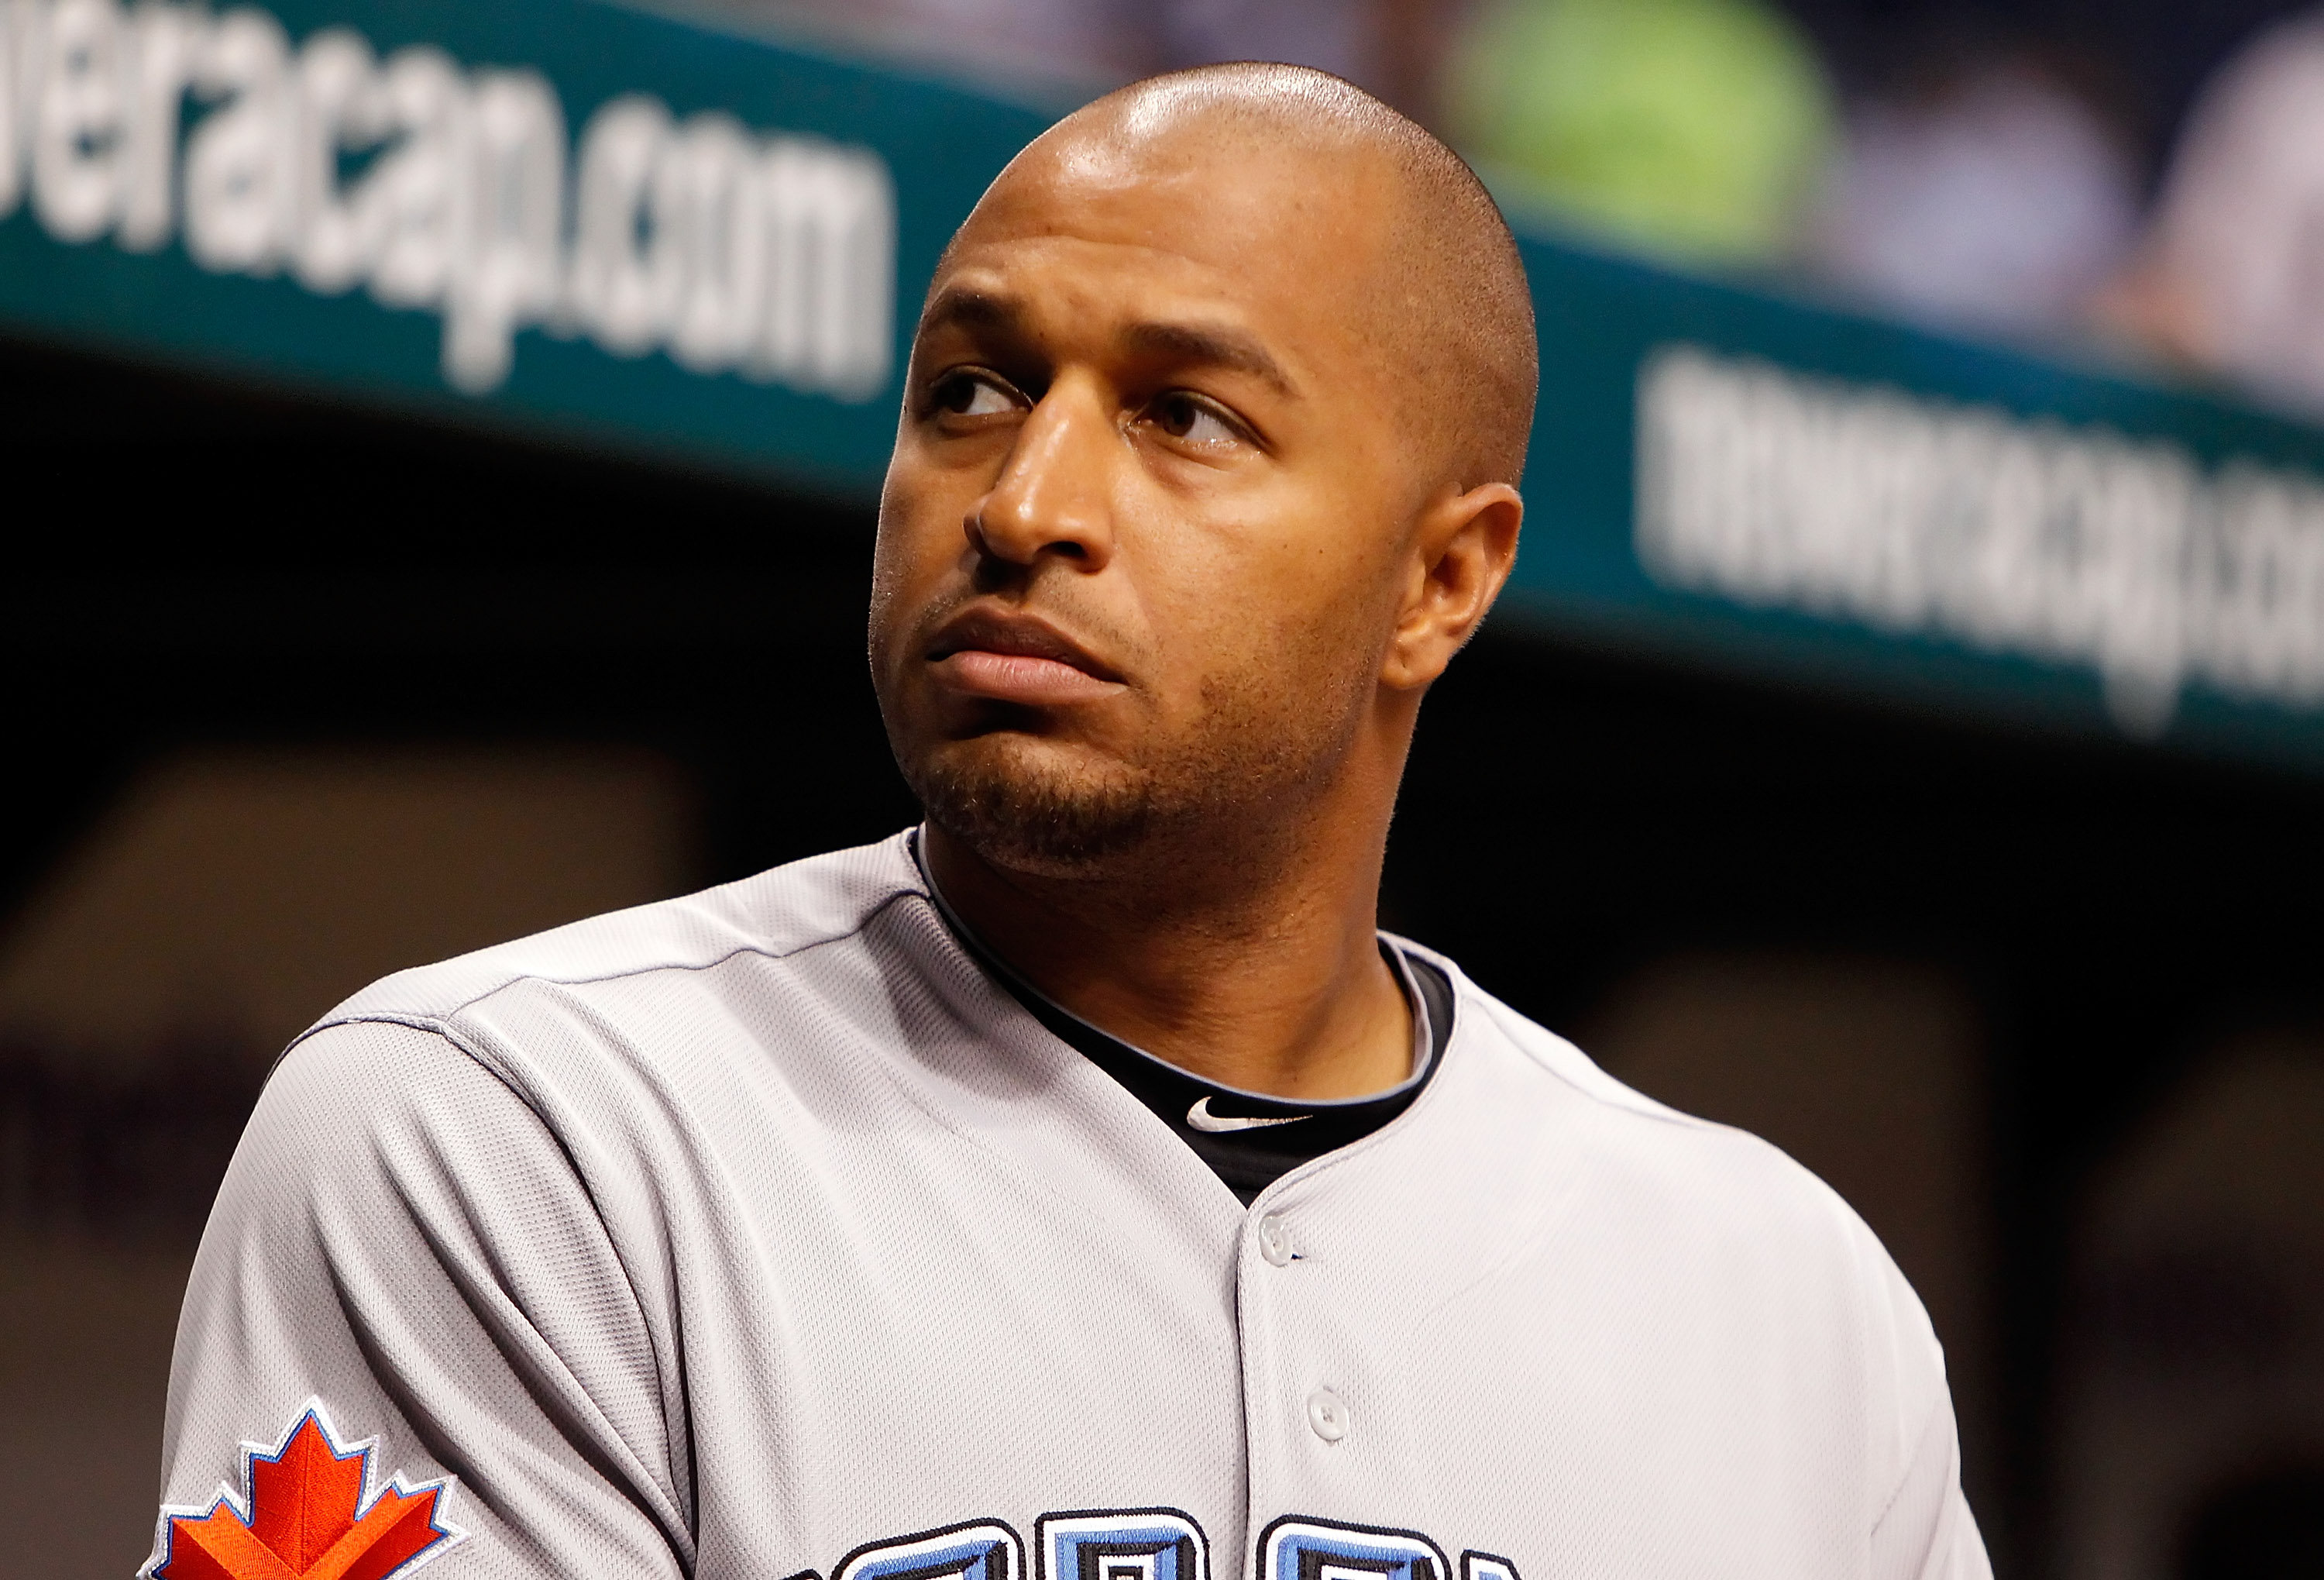 Vernon Wells To L.A. Angels: 5 Reasons To Hate the Trade